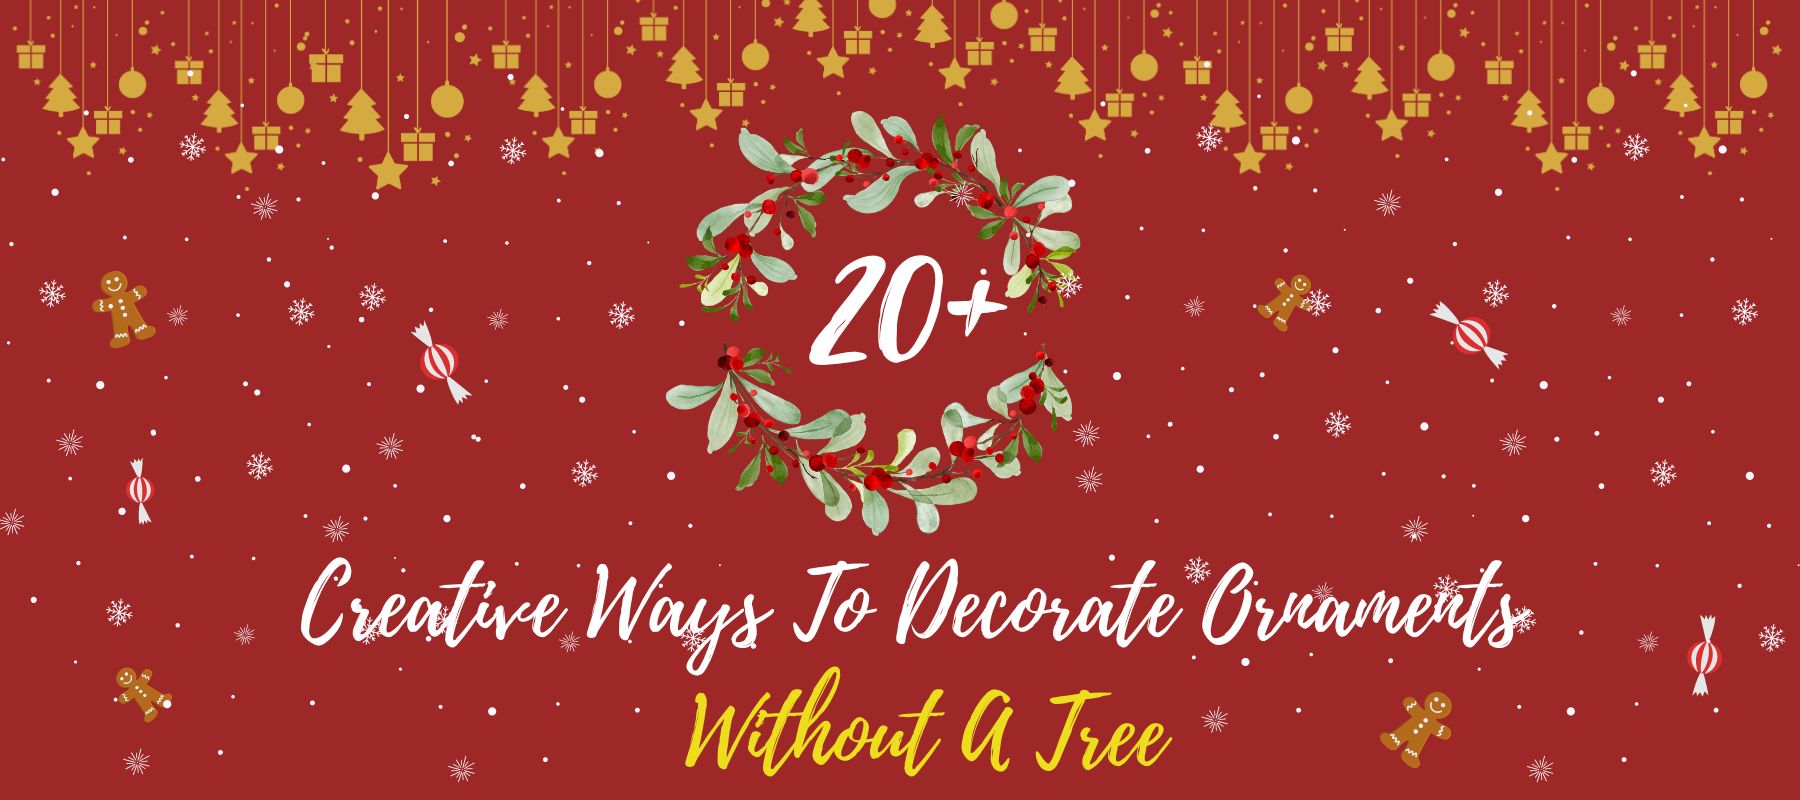 20 Creative Ways To Decorate Ornaments Without A Tree